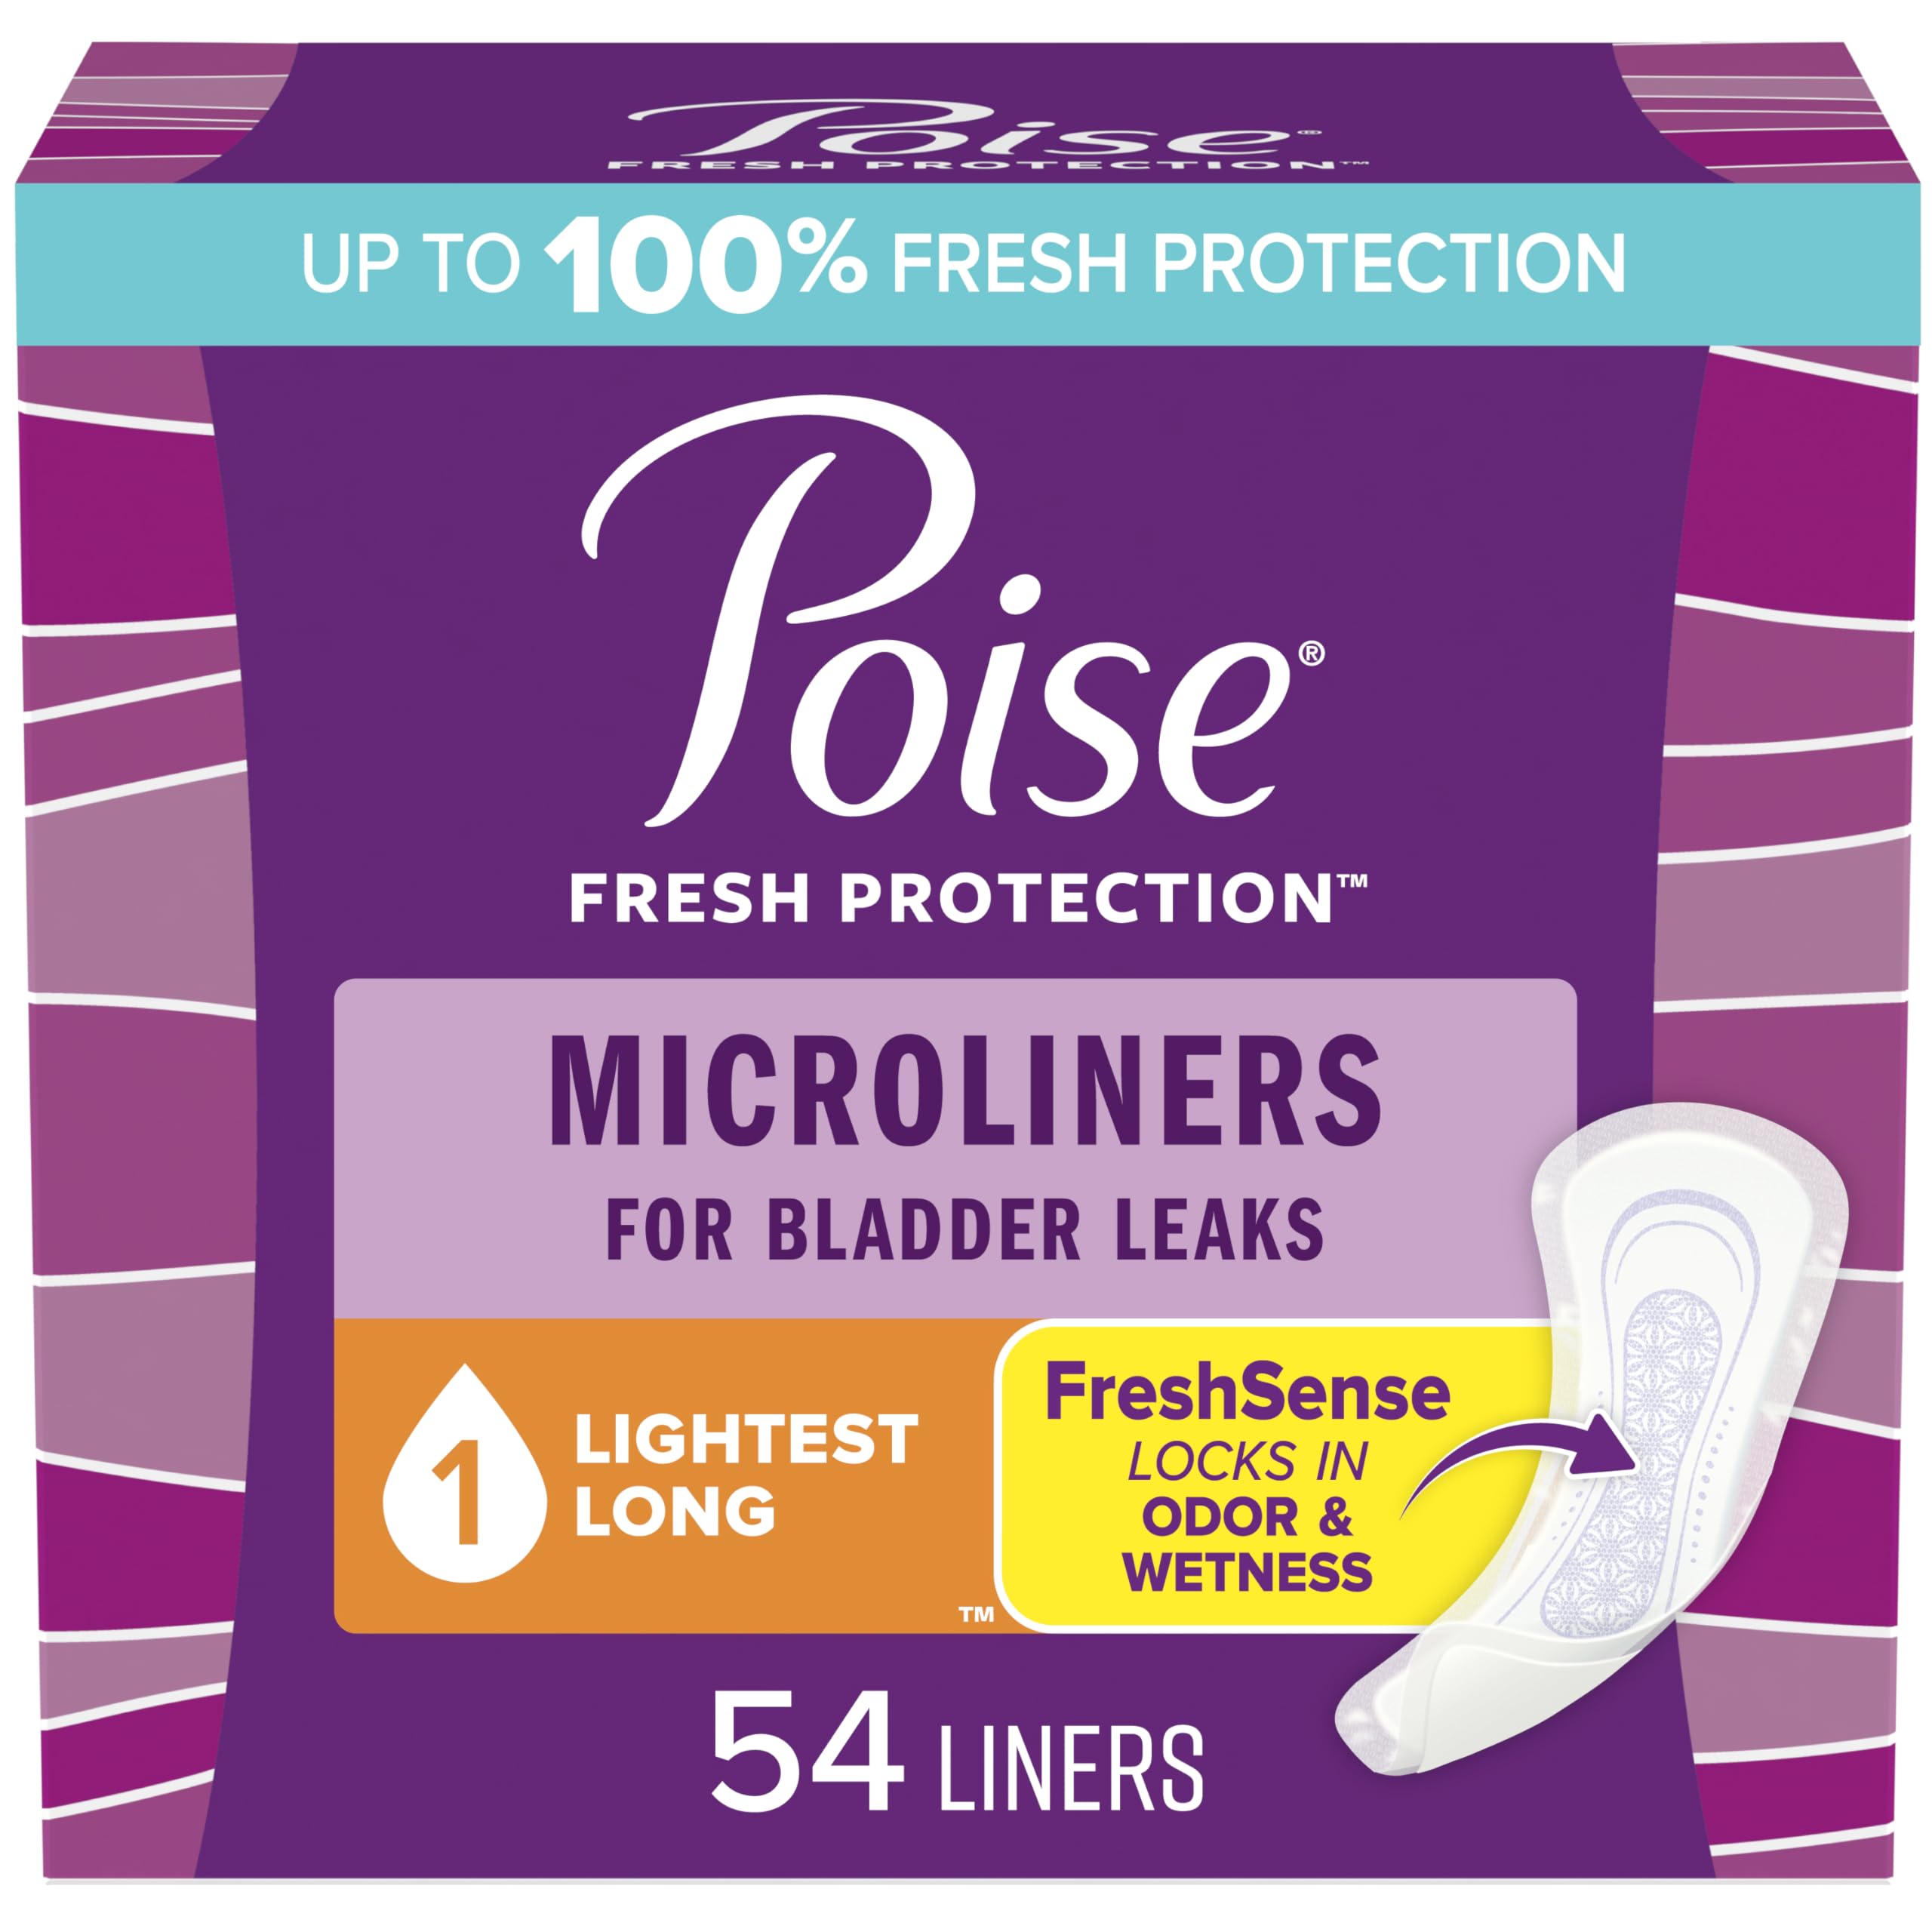 Poise Daily Microliners, Incontinence Panty Liners, 1 Drop Lightest Absorbency, Regular, 54 Count of Pantiliners